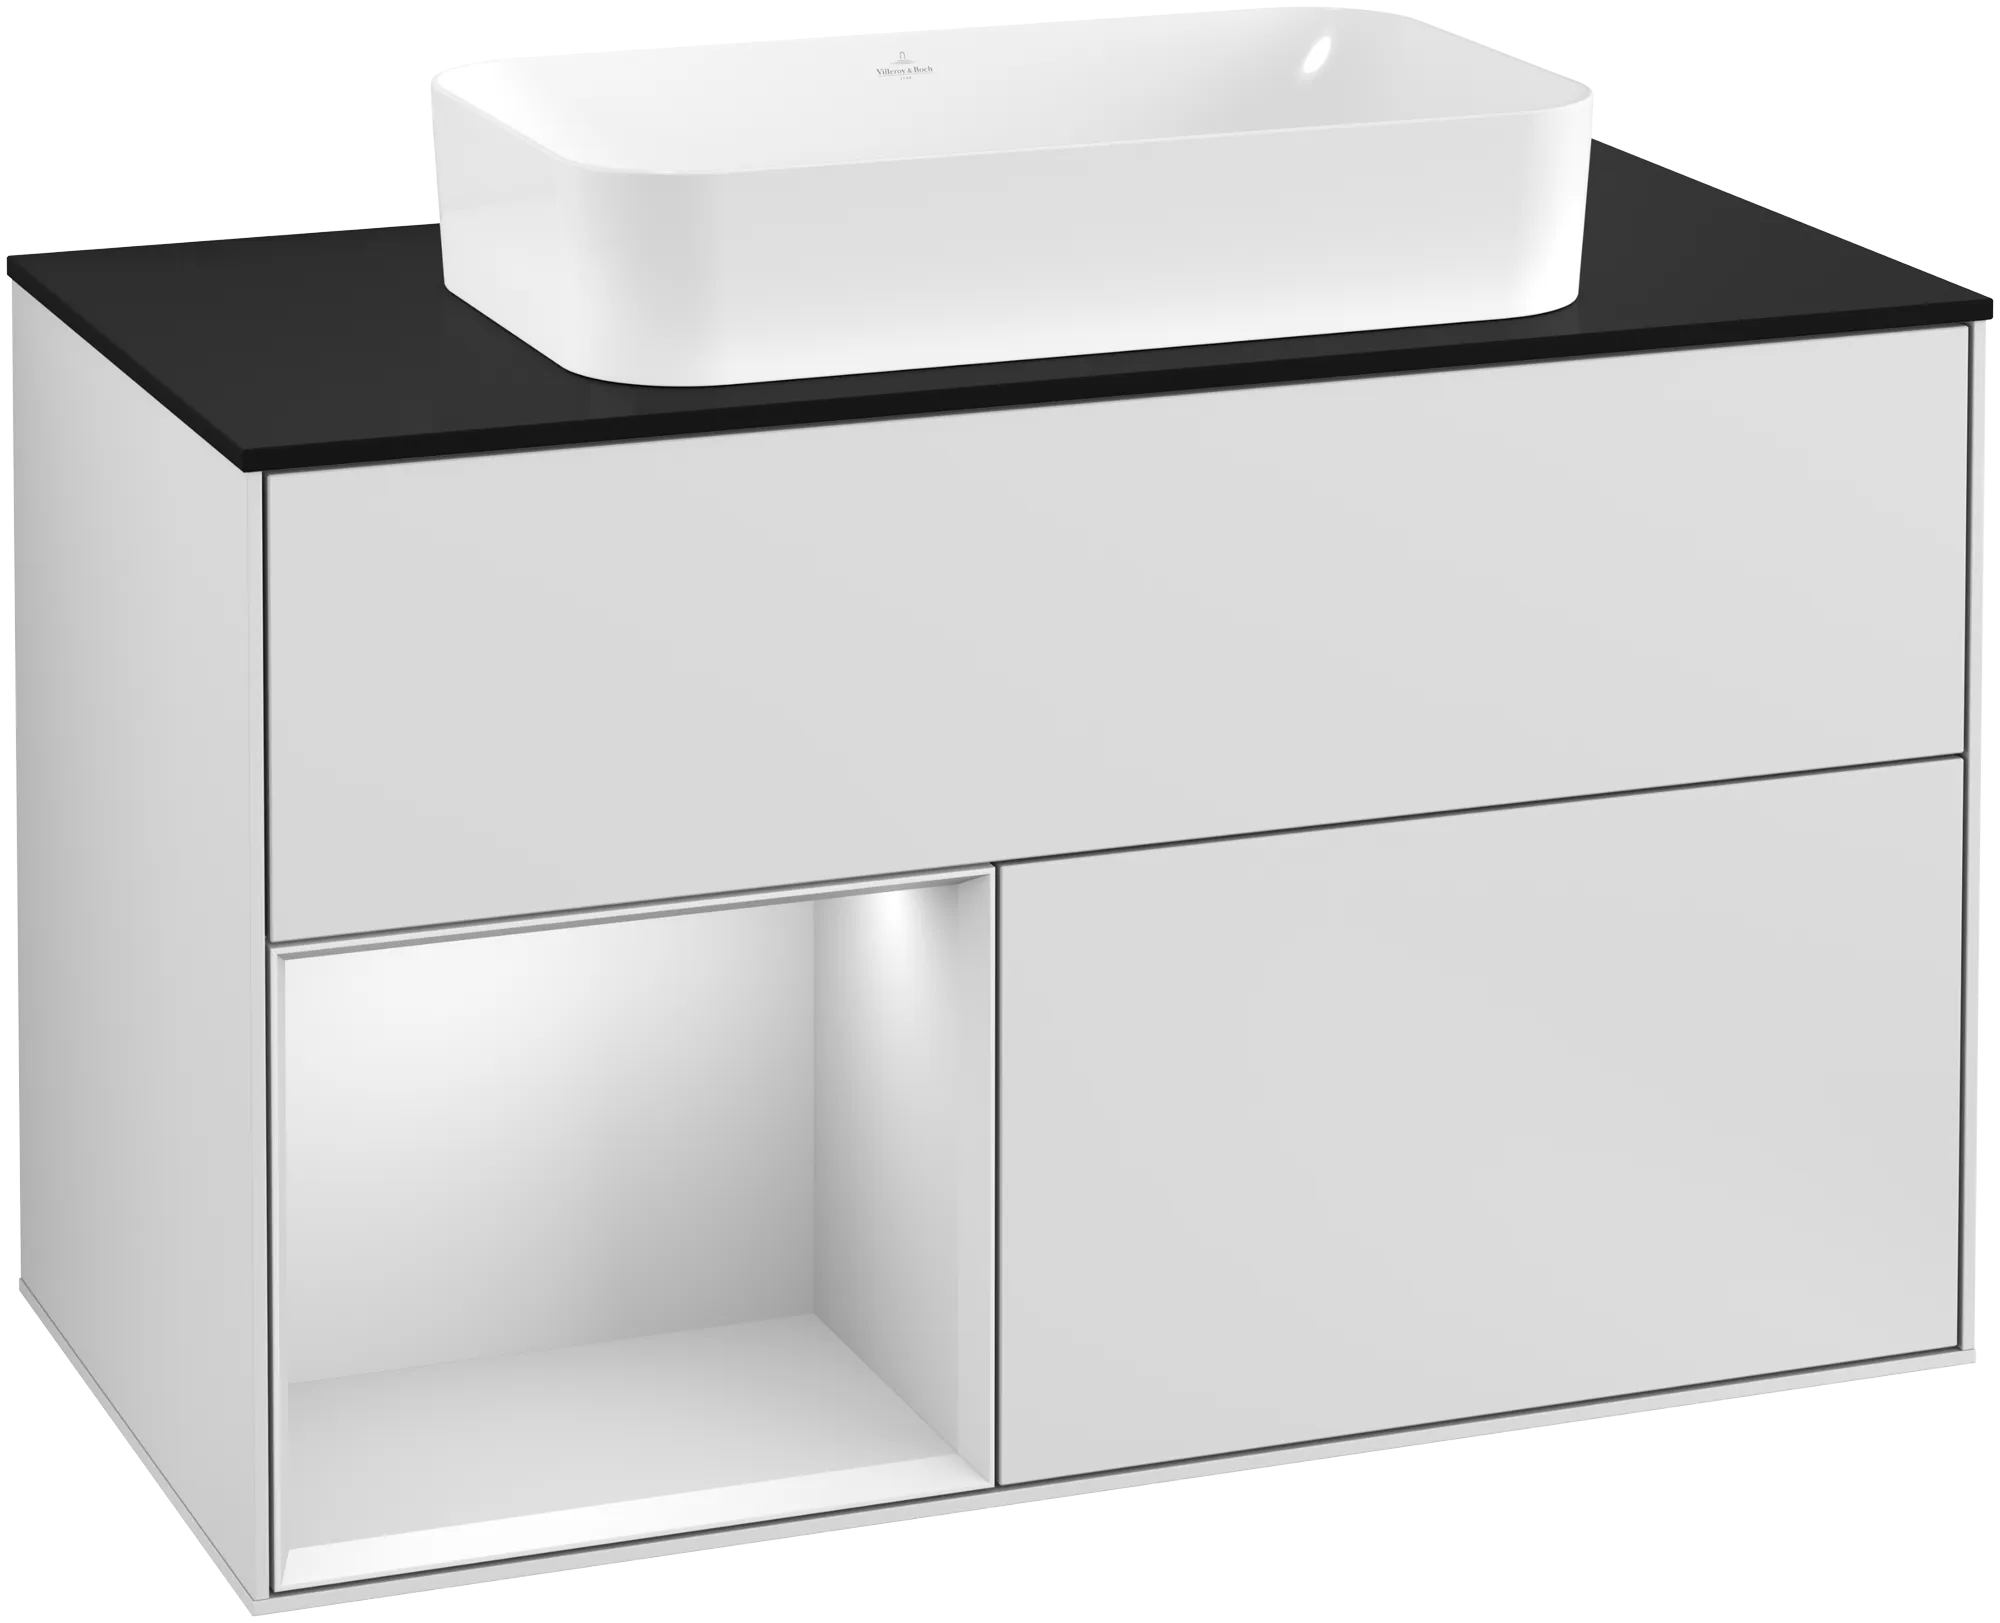 Picture of VILLEROY BOCH Finion Vanity unit, with lighting, 2 pull-out compartments, 1000 x 603 x 501 mm, White Matt Lacquer / White Matt Lacquer / Glass Black Matt #G242MTMT